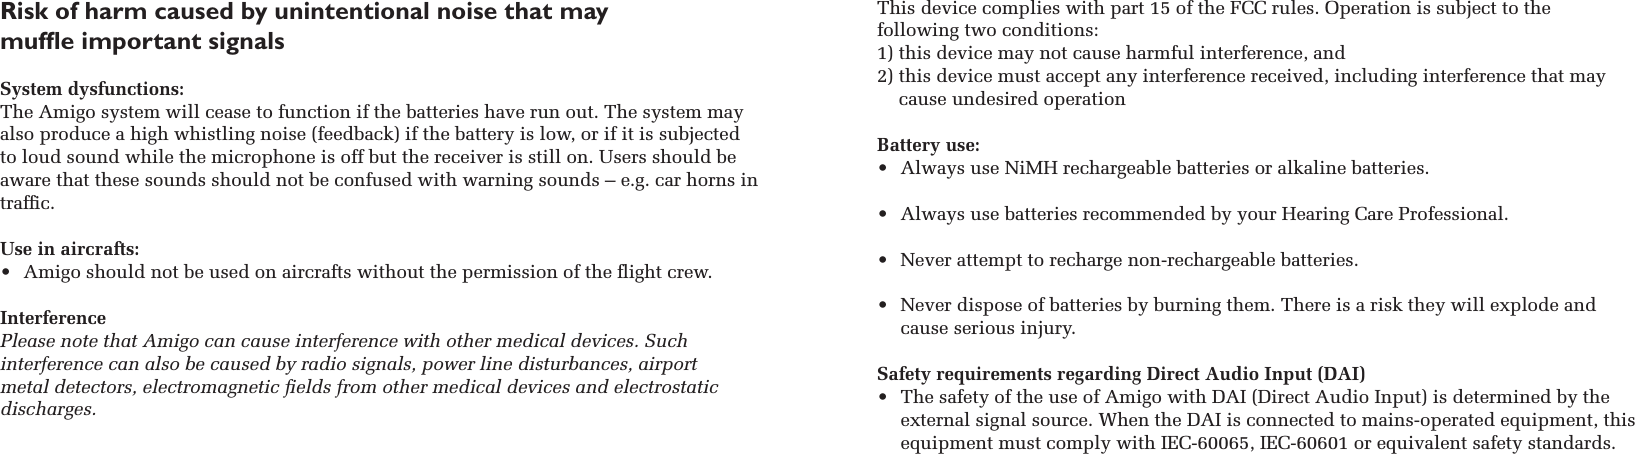 Risk of harm caused by unintentional noise that may  mufﬂe important signals  System dysfunctions: The Amigo system will cease to function if the batteries have run out. The system may also produce a high whistling noise (feedback) if the battery is low, or if it is subjected to loud sound while the microphone is off but the receiver is still on. Users should be aware that these sounds should not be confused with warning sounds – e.g. car horns in trafﬁc.  Use in aircrafts: •  Amigo should not be used on aircrafts without the permission of the ﬂight crew.InterferencePlease note that Amigo can cause interference with other medical devices. Such  interference can also be caused by radio signals, power line disturbances, airport  metal detectors, electromagnetic ﬁelds from other medical devices and electrostatic discharges.This device complies with part 15 of the FCC rules. Operation is subject to the  following two conditions:1) this device may not cause harmful interference, and 2)  this device must accept any interference received, including interference that may cause undesired operation Battery use:•  Always use NiMH rechargeable batteries or alkaline batteries.•  Always use batteries recommended by your Hearing Care Professional.•  Never attempt to recharge non-rechargeable batteries. •  Never dispose of batteries by burning them. There is a risk they will explode and cause serious injury.Safety requirements regarding Direct Audio Input (DAI) •  The safety of the use of Amigo with DAI (Direct Audio Input) is determined by the external signal source. When the DAI is connected to mains-operated equipment, this equipment must comply with IEC-60065, IEC-60601 or equivalent safety standards.